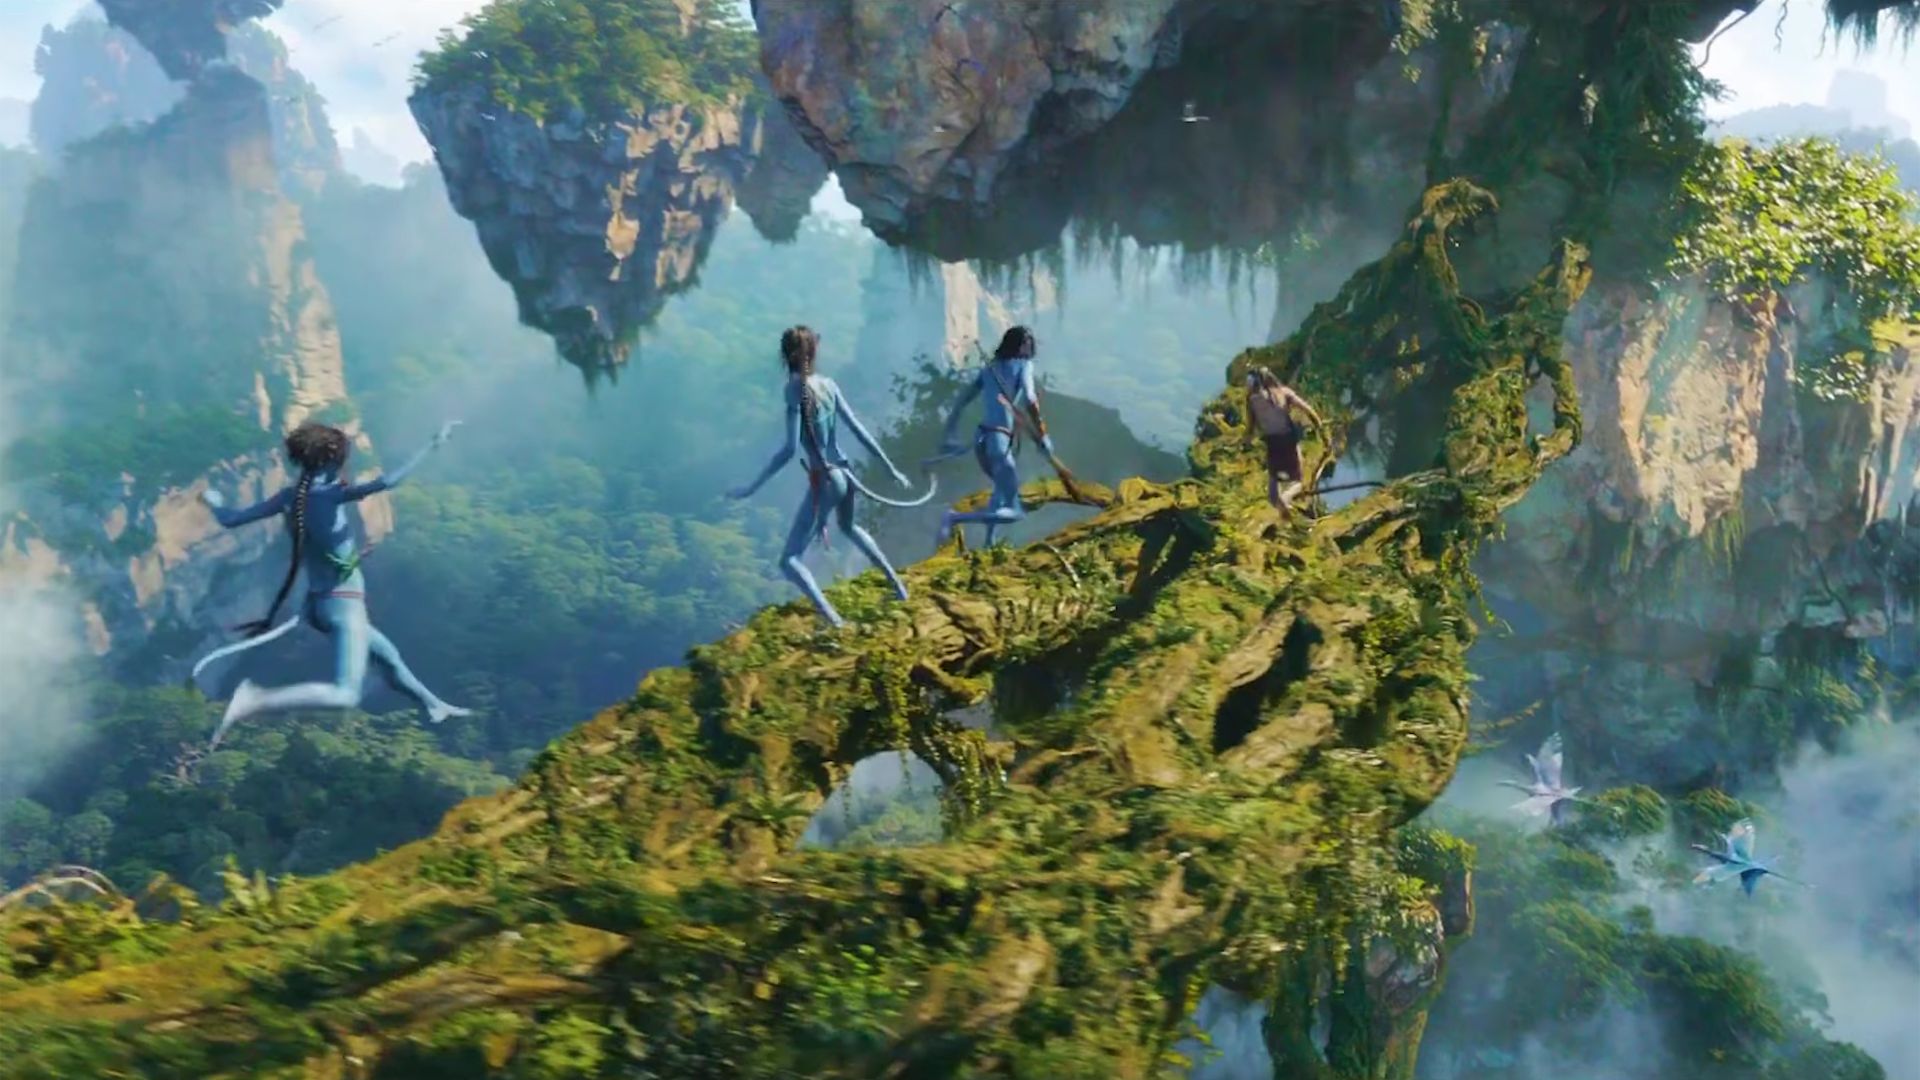 Before our next chapter begins experience Avatar in remastered 4K 3D HDR  in theaters September 23rd for a limited time  By James Cameron  Facebook